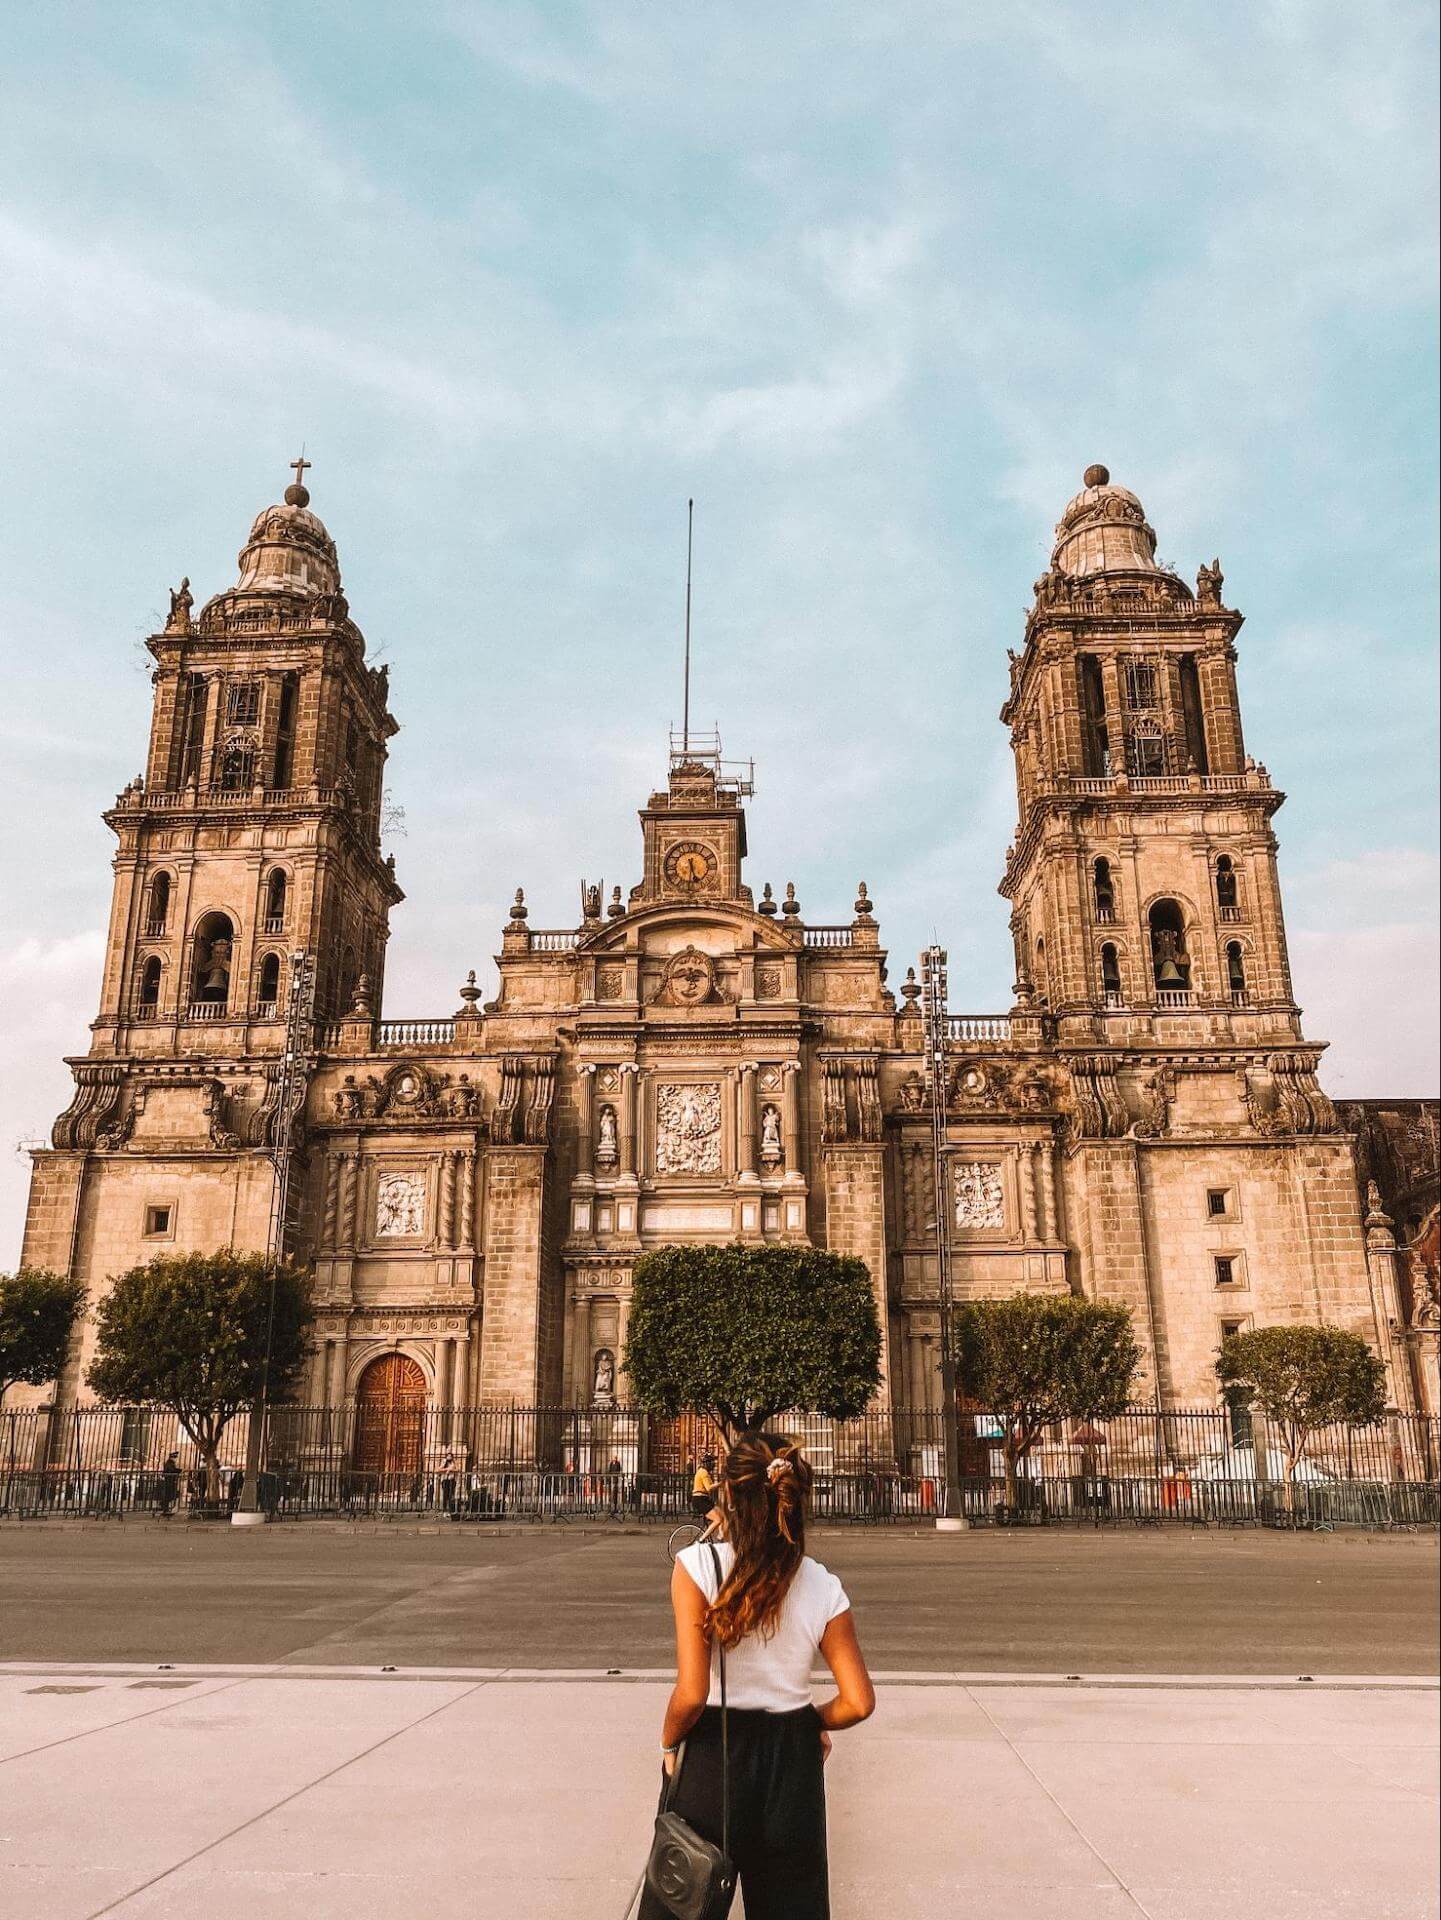 Nabila Ismail of Dose of Travel stands with her back to the camera facing a historic building in Mexico City